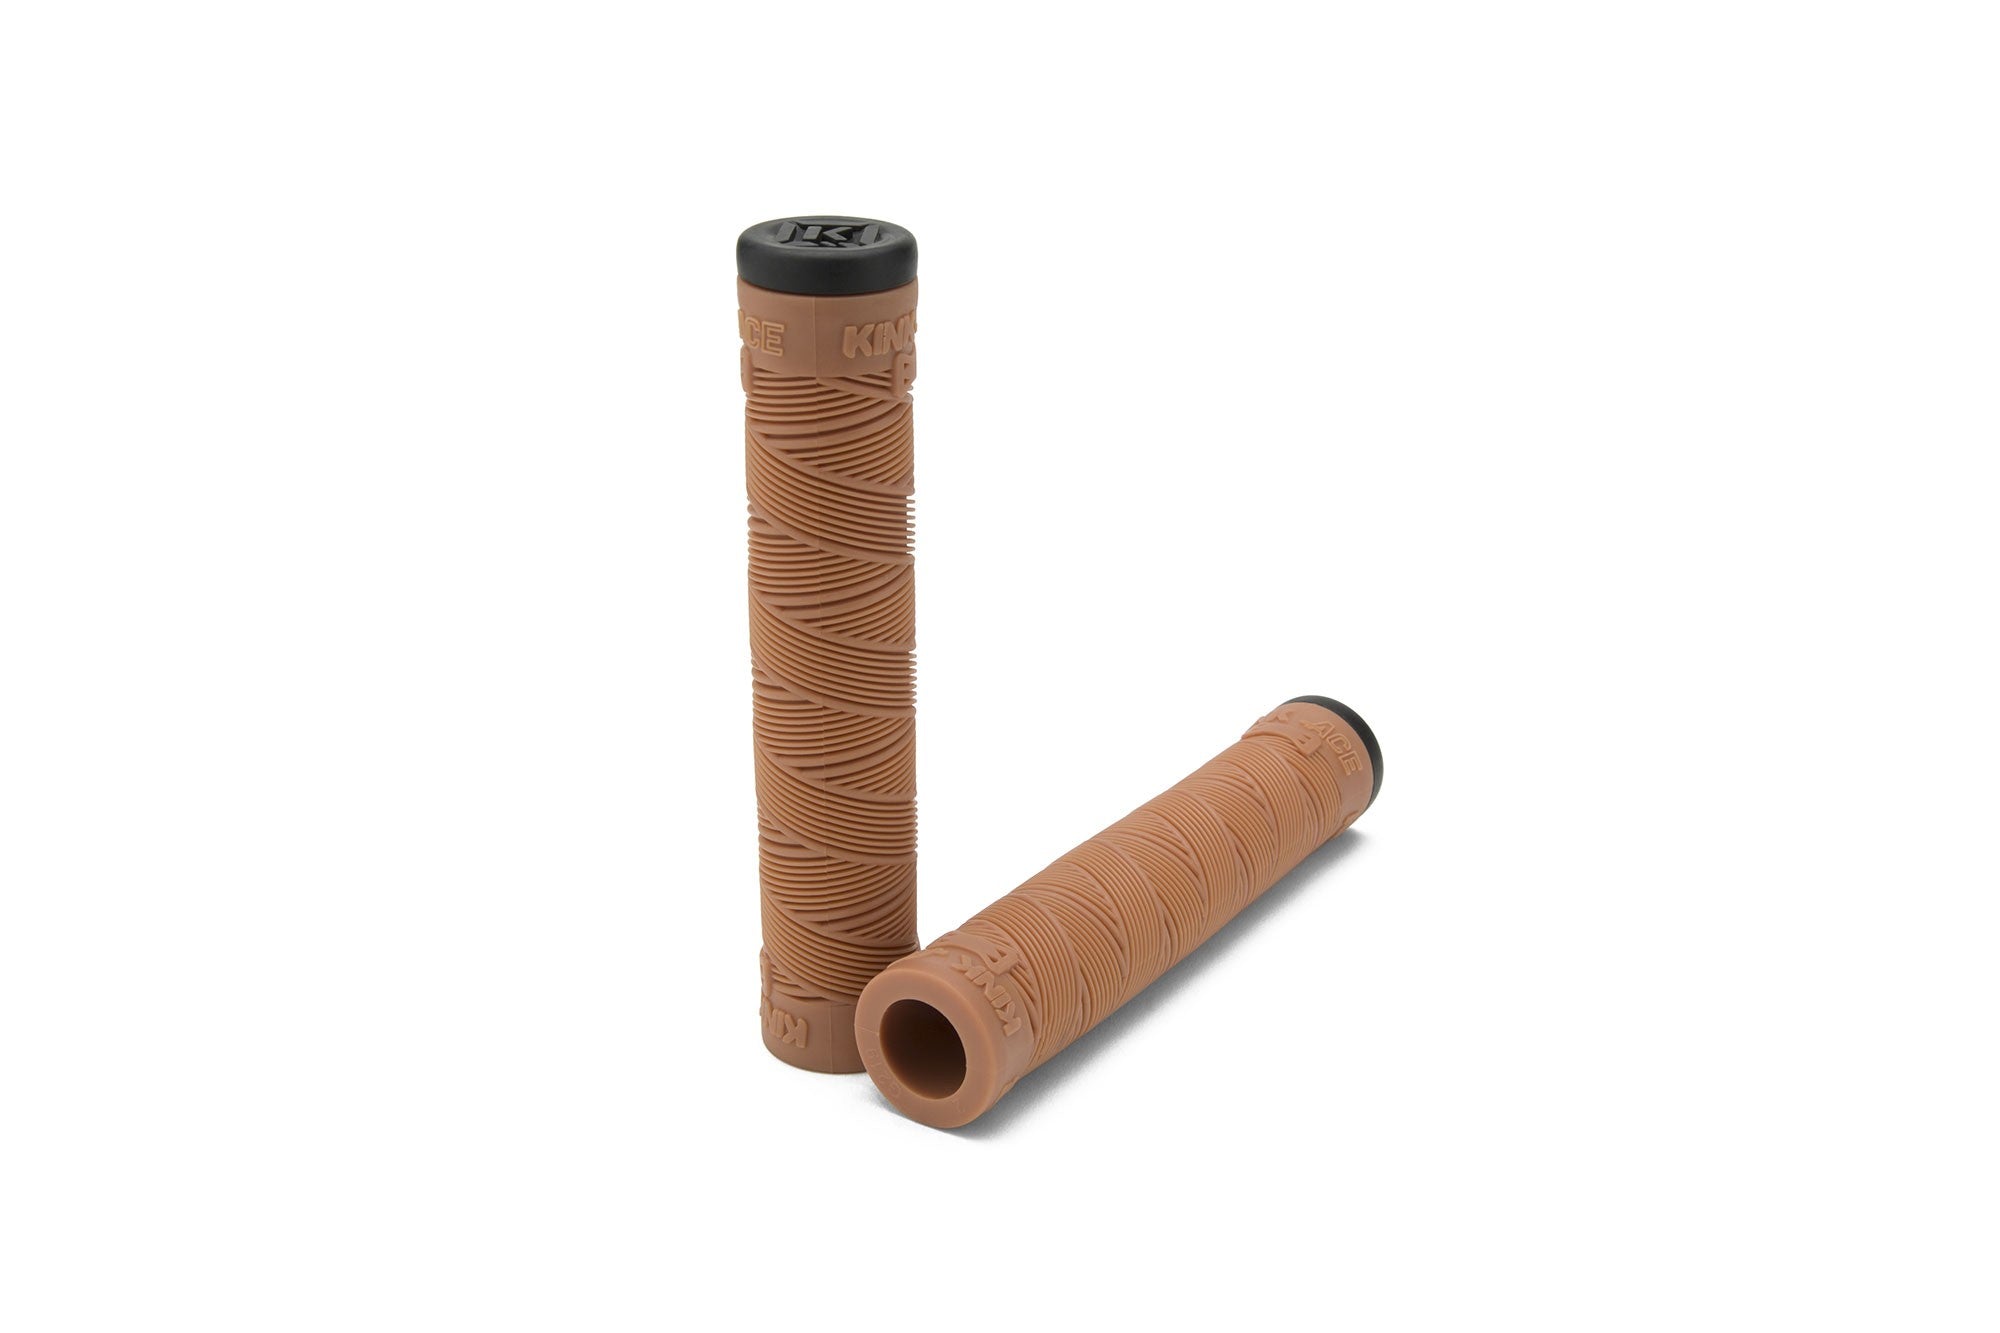 Kink Ace Grips (Various Colors) - Downtown Bicycle Works 